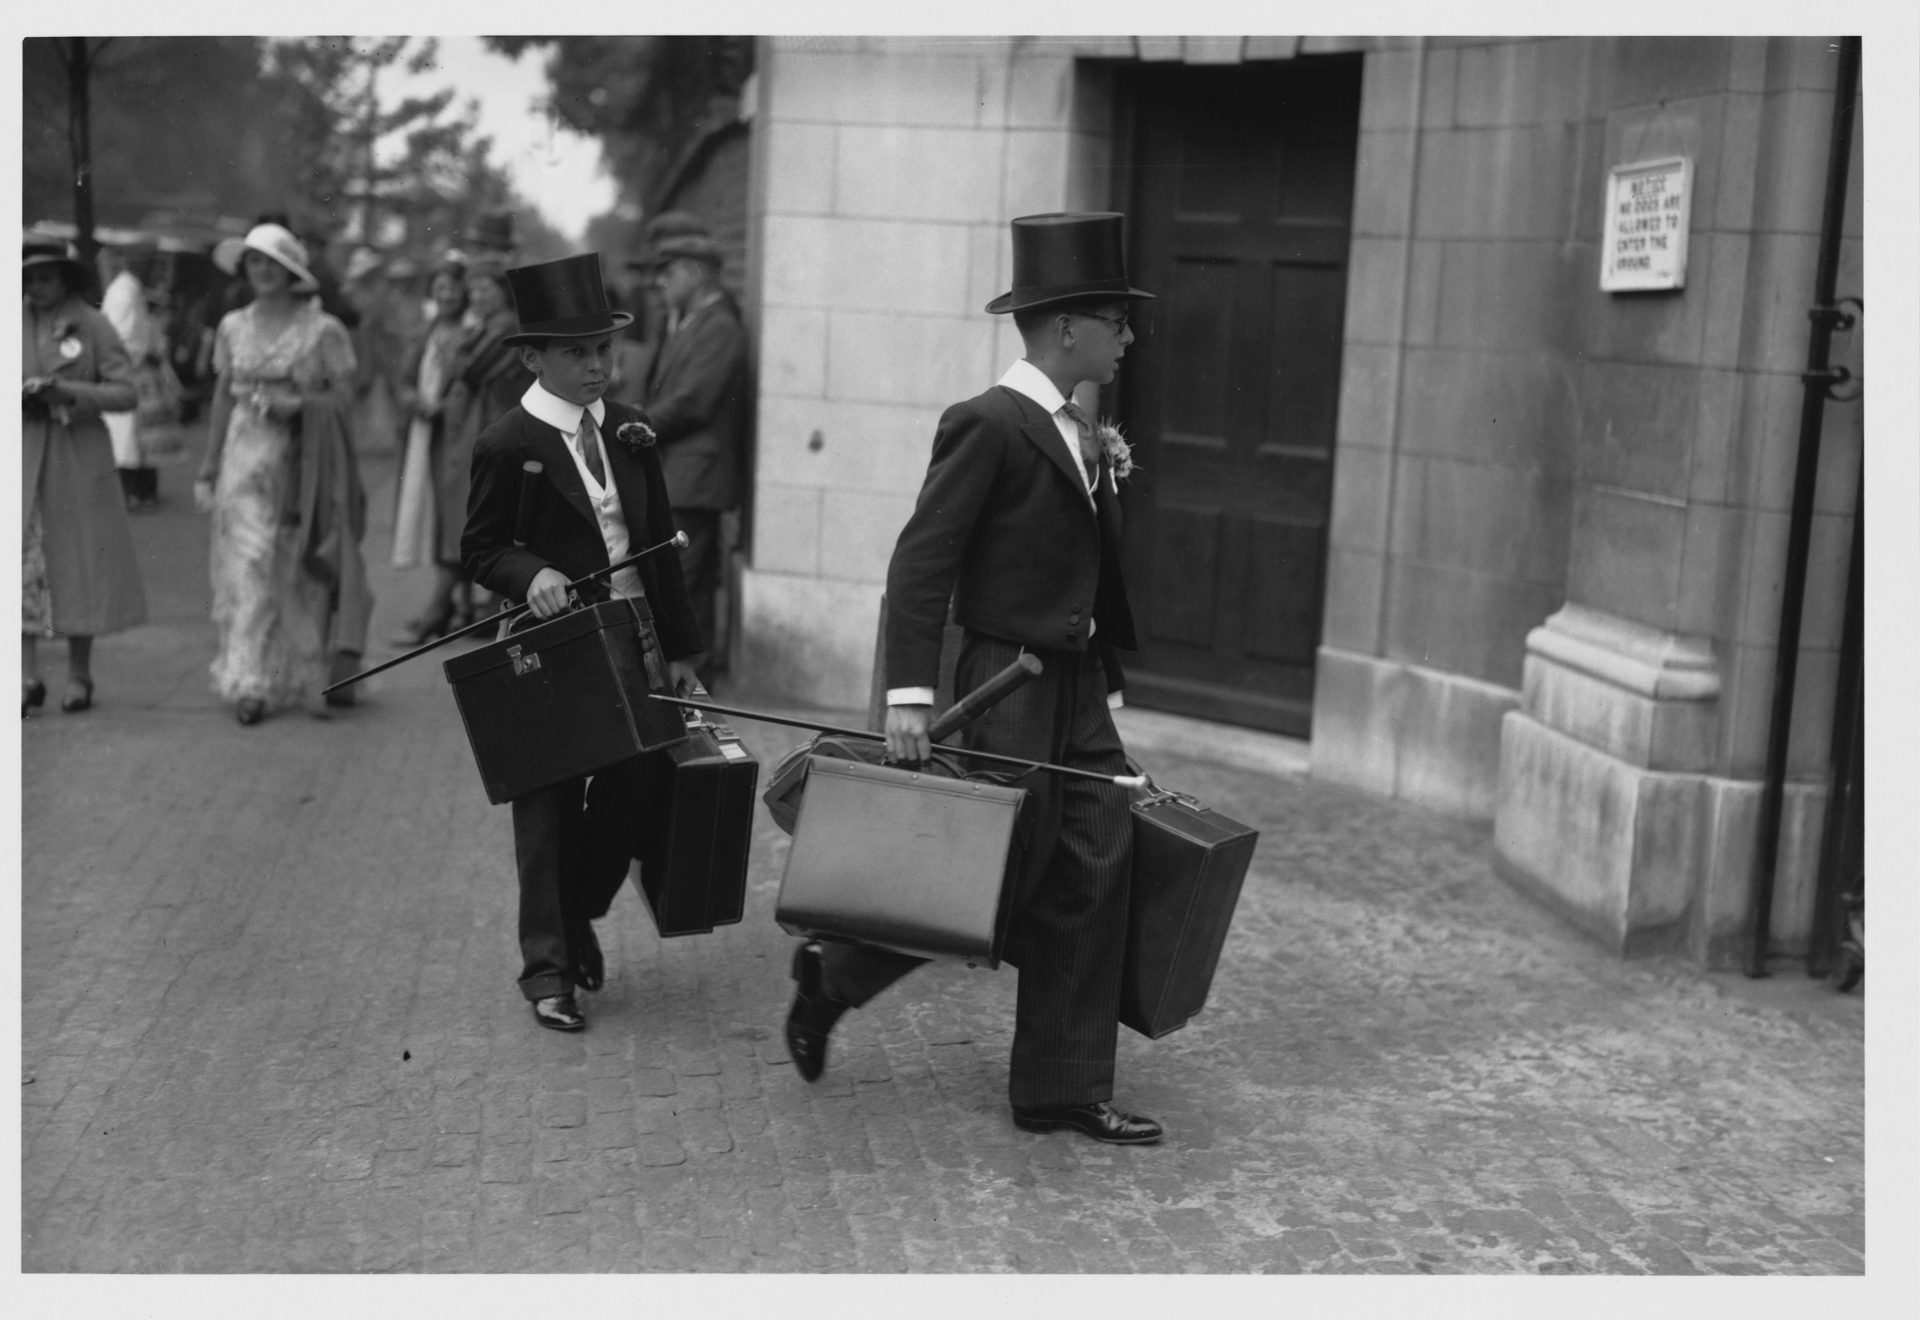 Portfolios aplenty... two students dressed in uniform, carrying briefcases arrive at Lords in 1934. Photo: Corbis via Getty Images